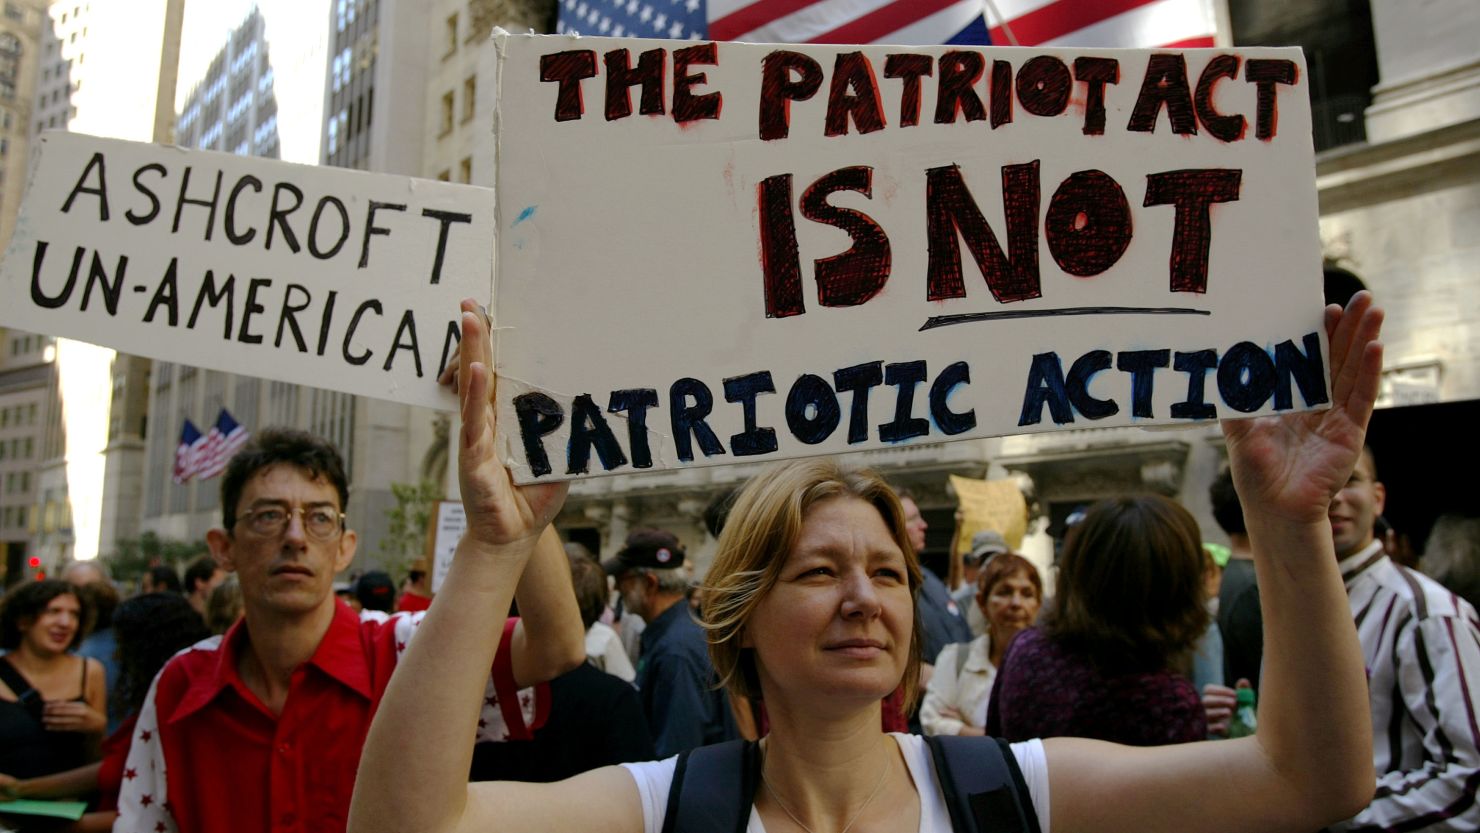 Protesters hold up signs criticizing the Patriot Act and then-U.S. Attorney General John Ashcroft on September 9, 2003 .